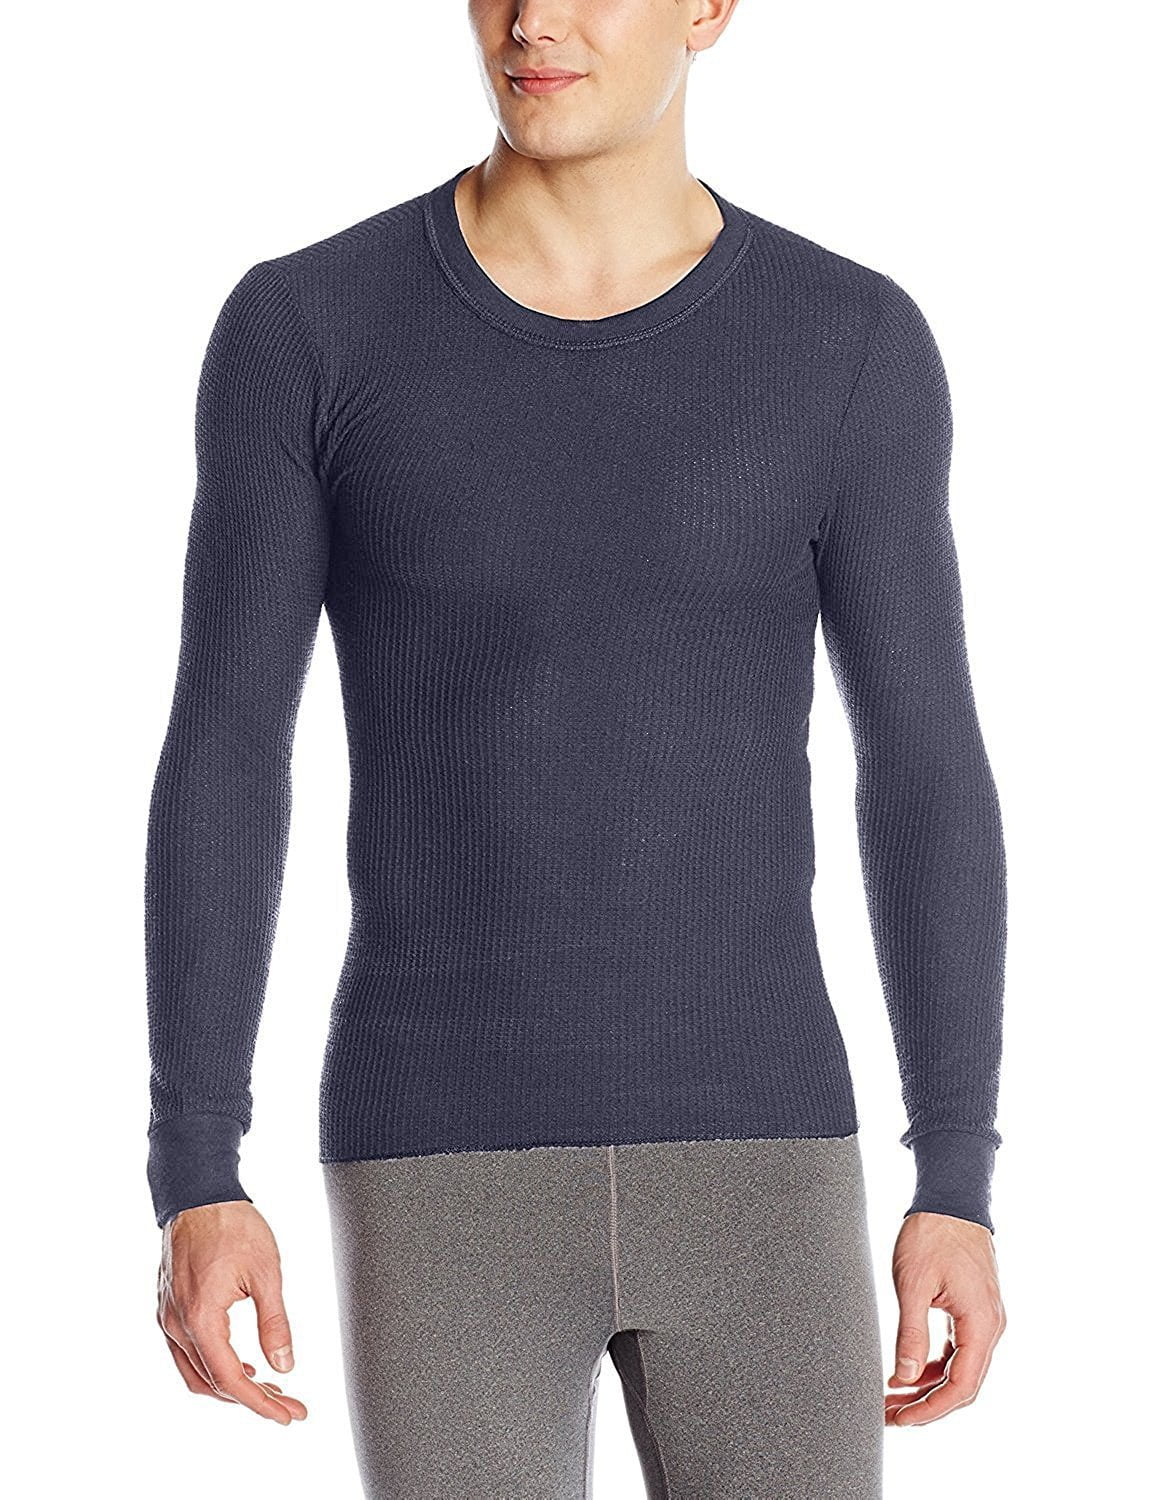 Rich Cotton Mens Tick Midweight Waffle Thermal Shirt Long Sleeve Top Underwear 1 2 3 or 6 Pack